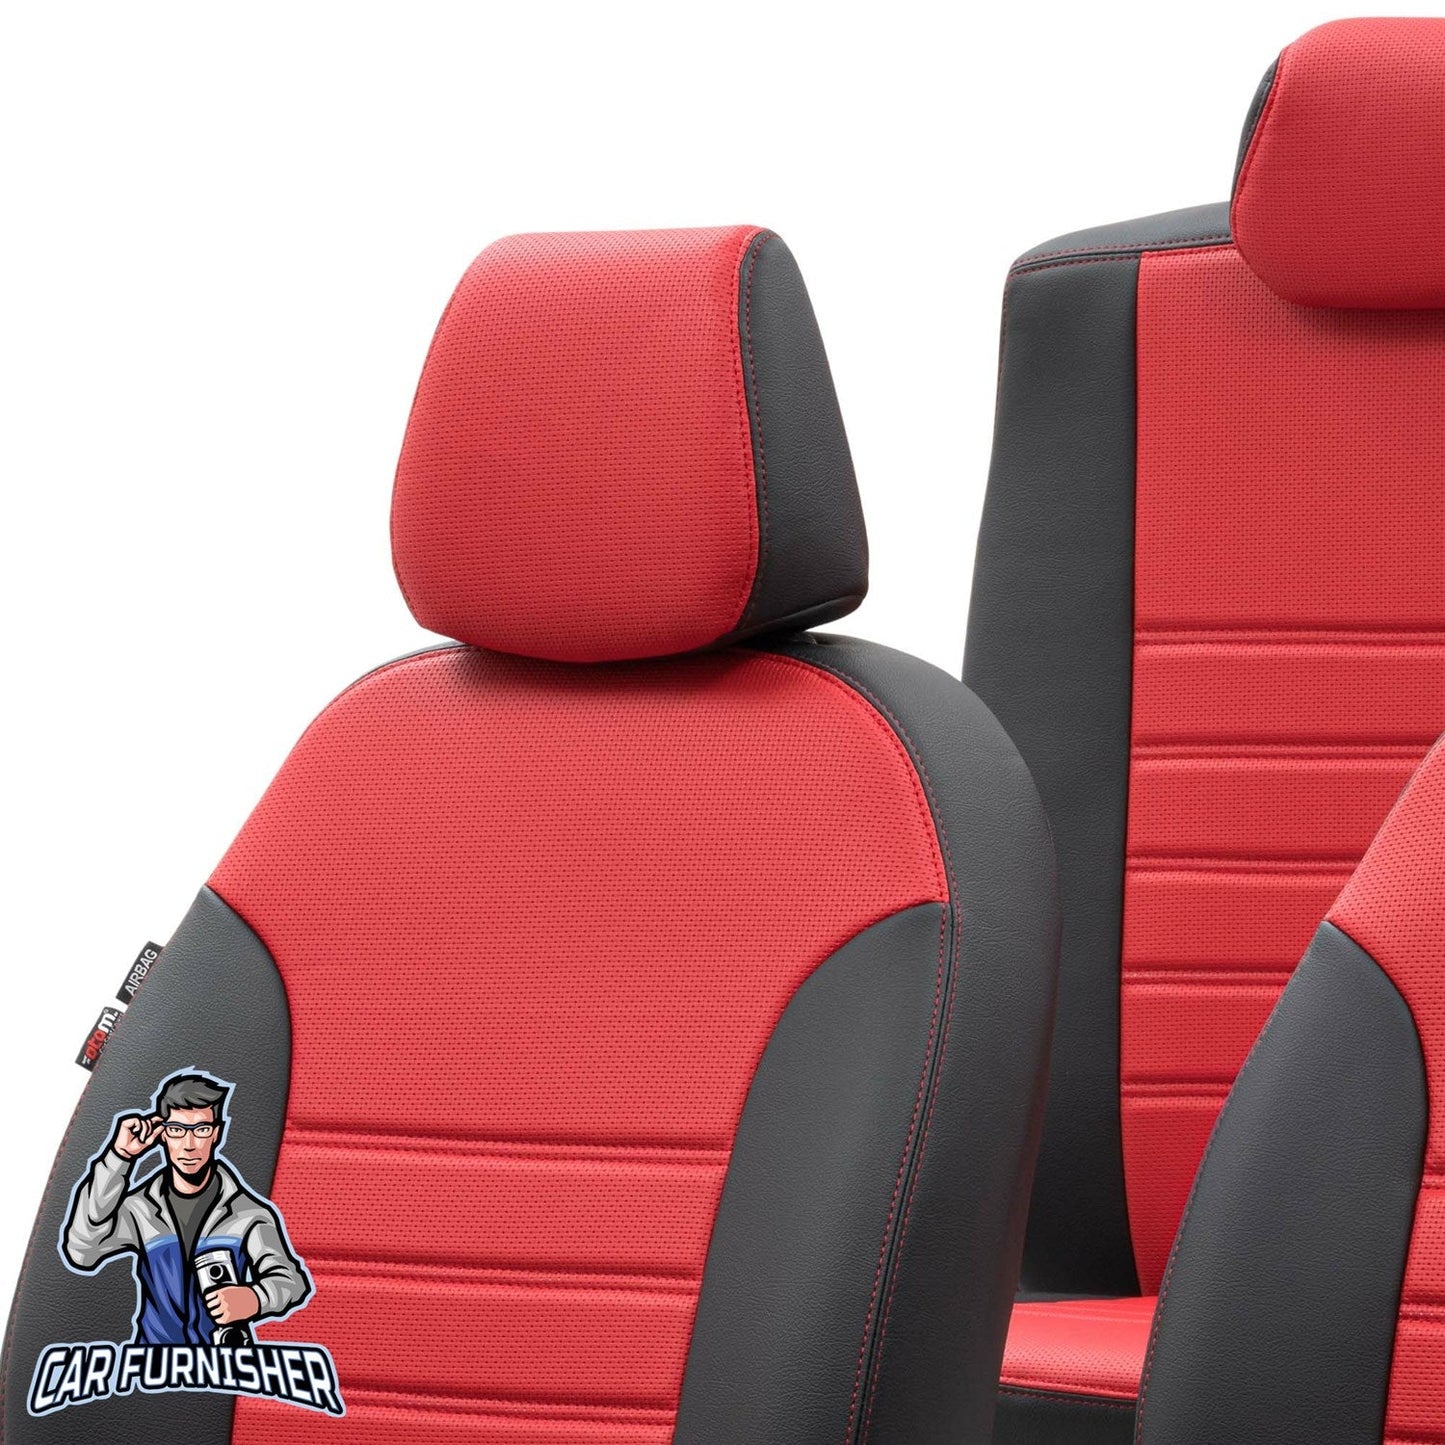 Mercedes E Series Seat Covers New York Leather Design Red Leather